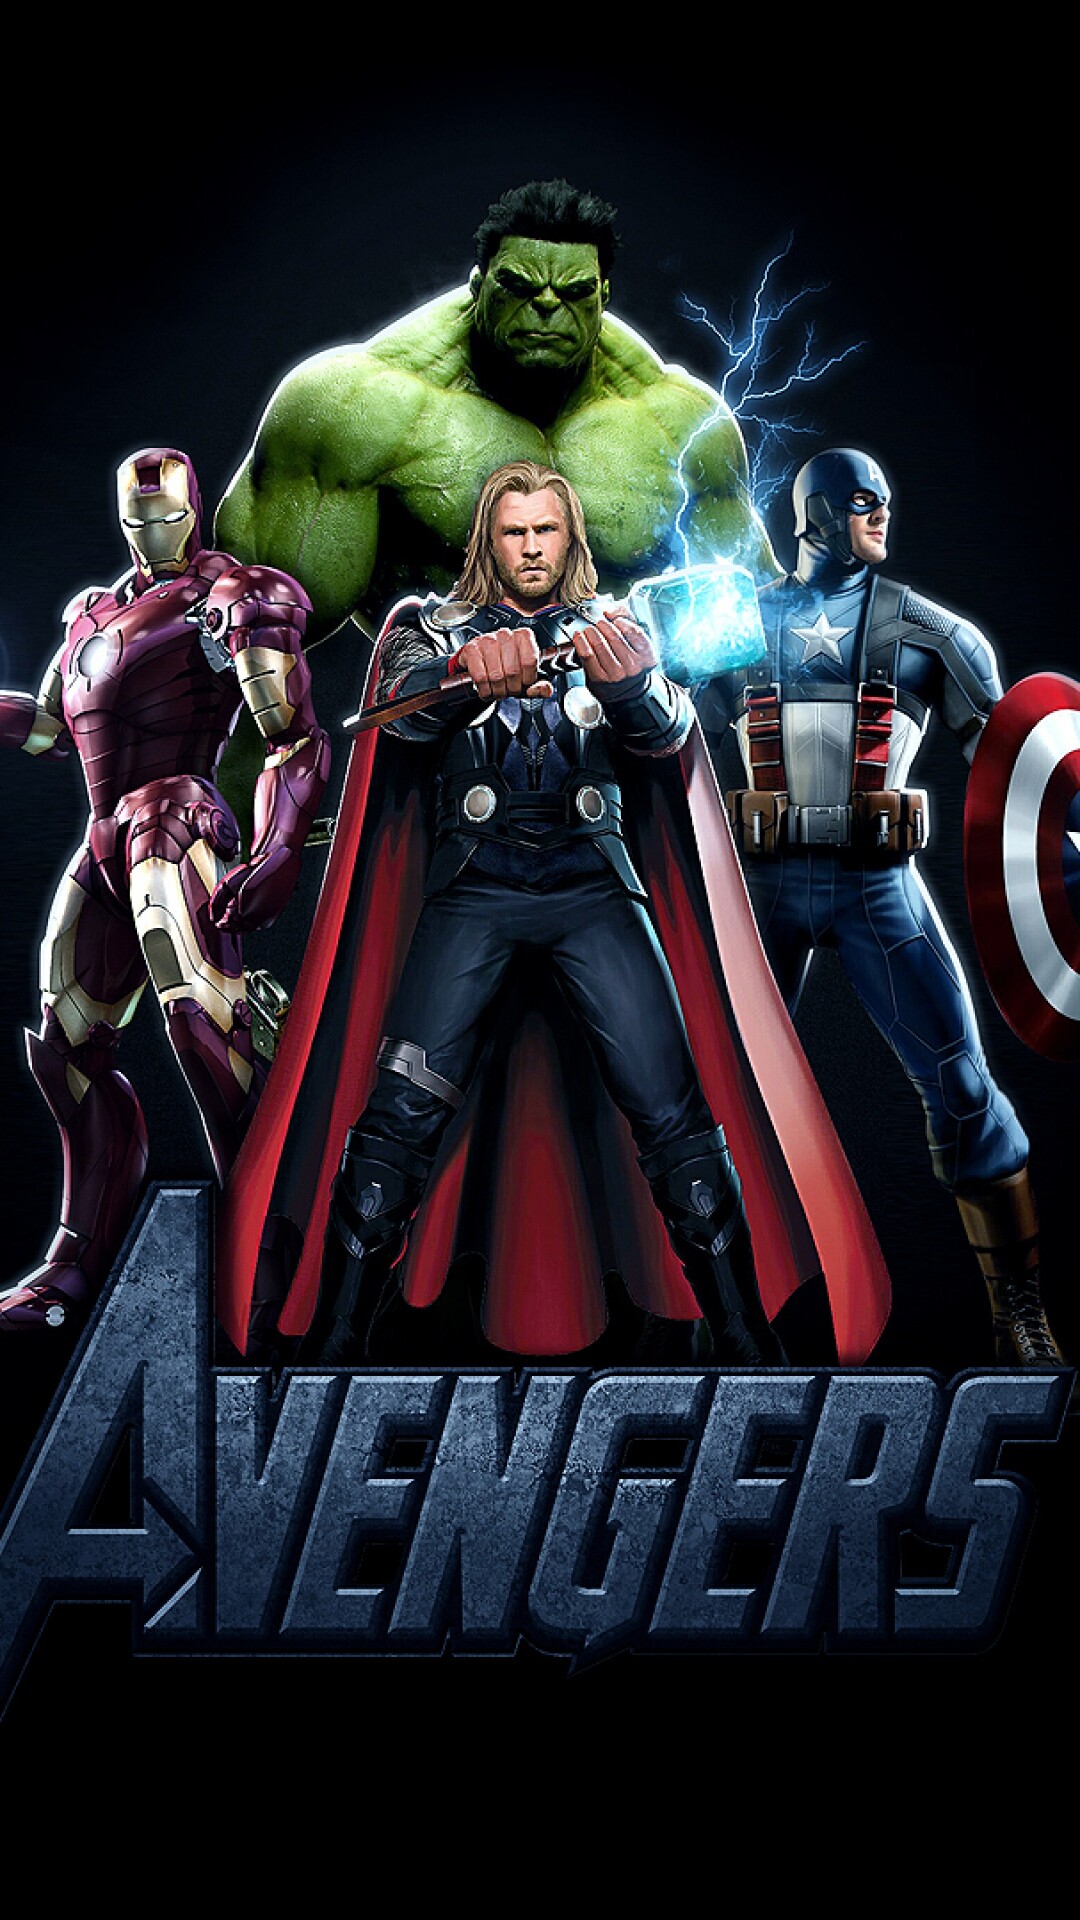 Avengers: The film was written and directed by Josh Whedon and features an ensemble cast that includes Robert Downey Jr, Chris Hemsworth, Mark Ruffalo, Chris Evans, and many others. 1080x1920 Full HD Wallpaper.